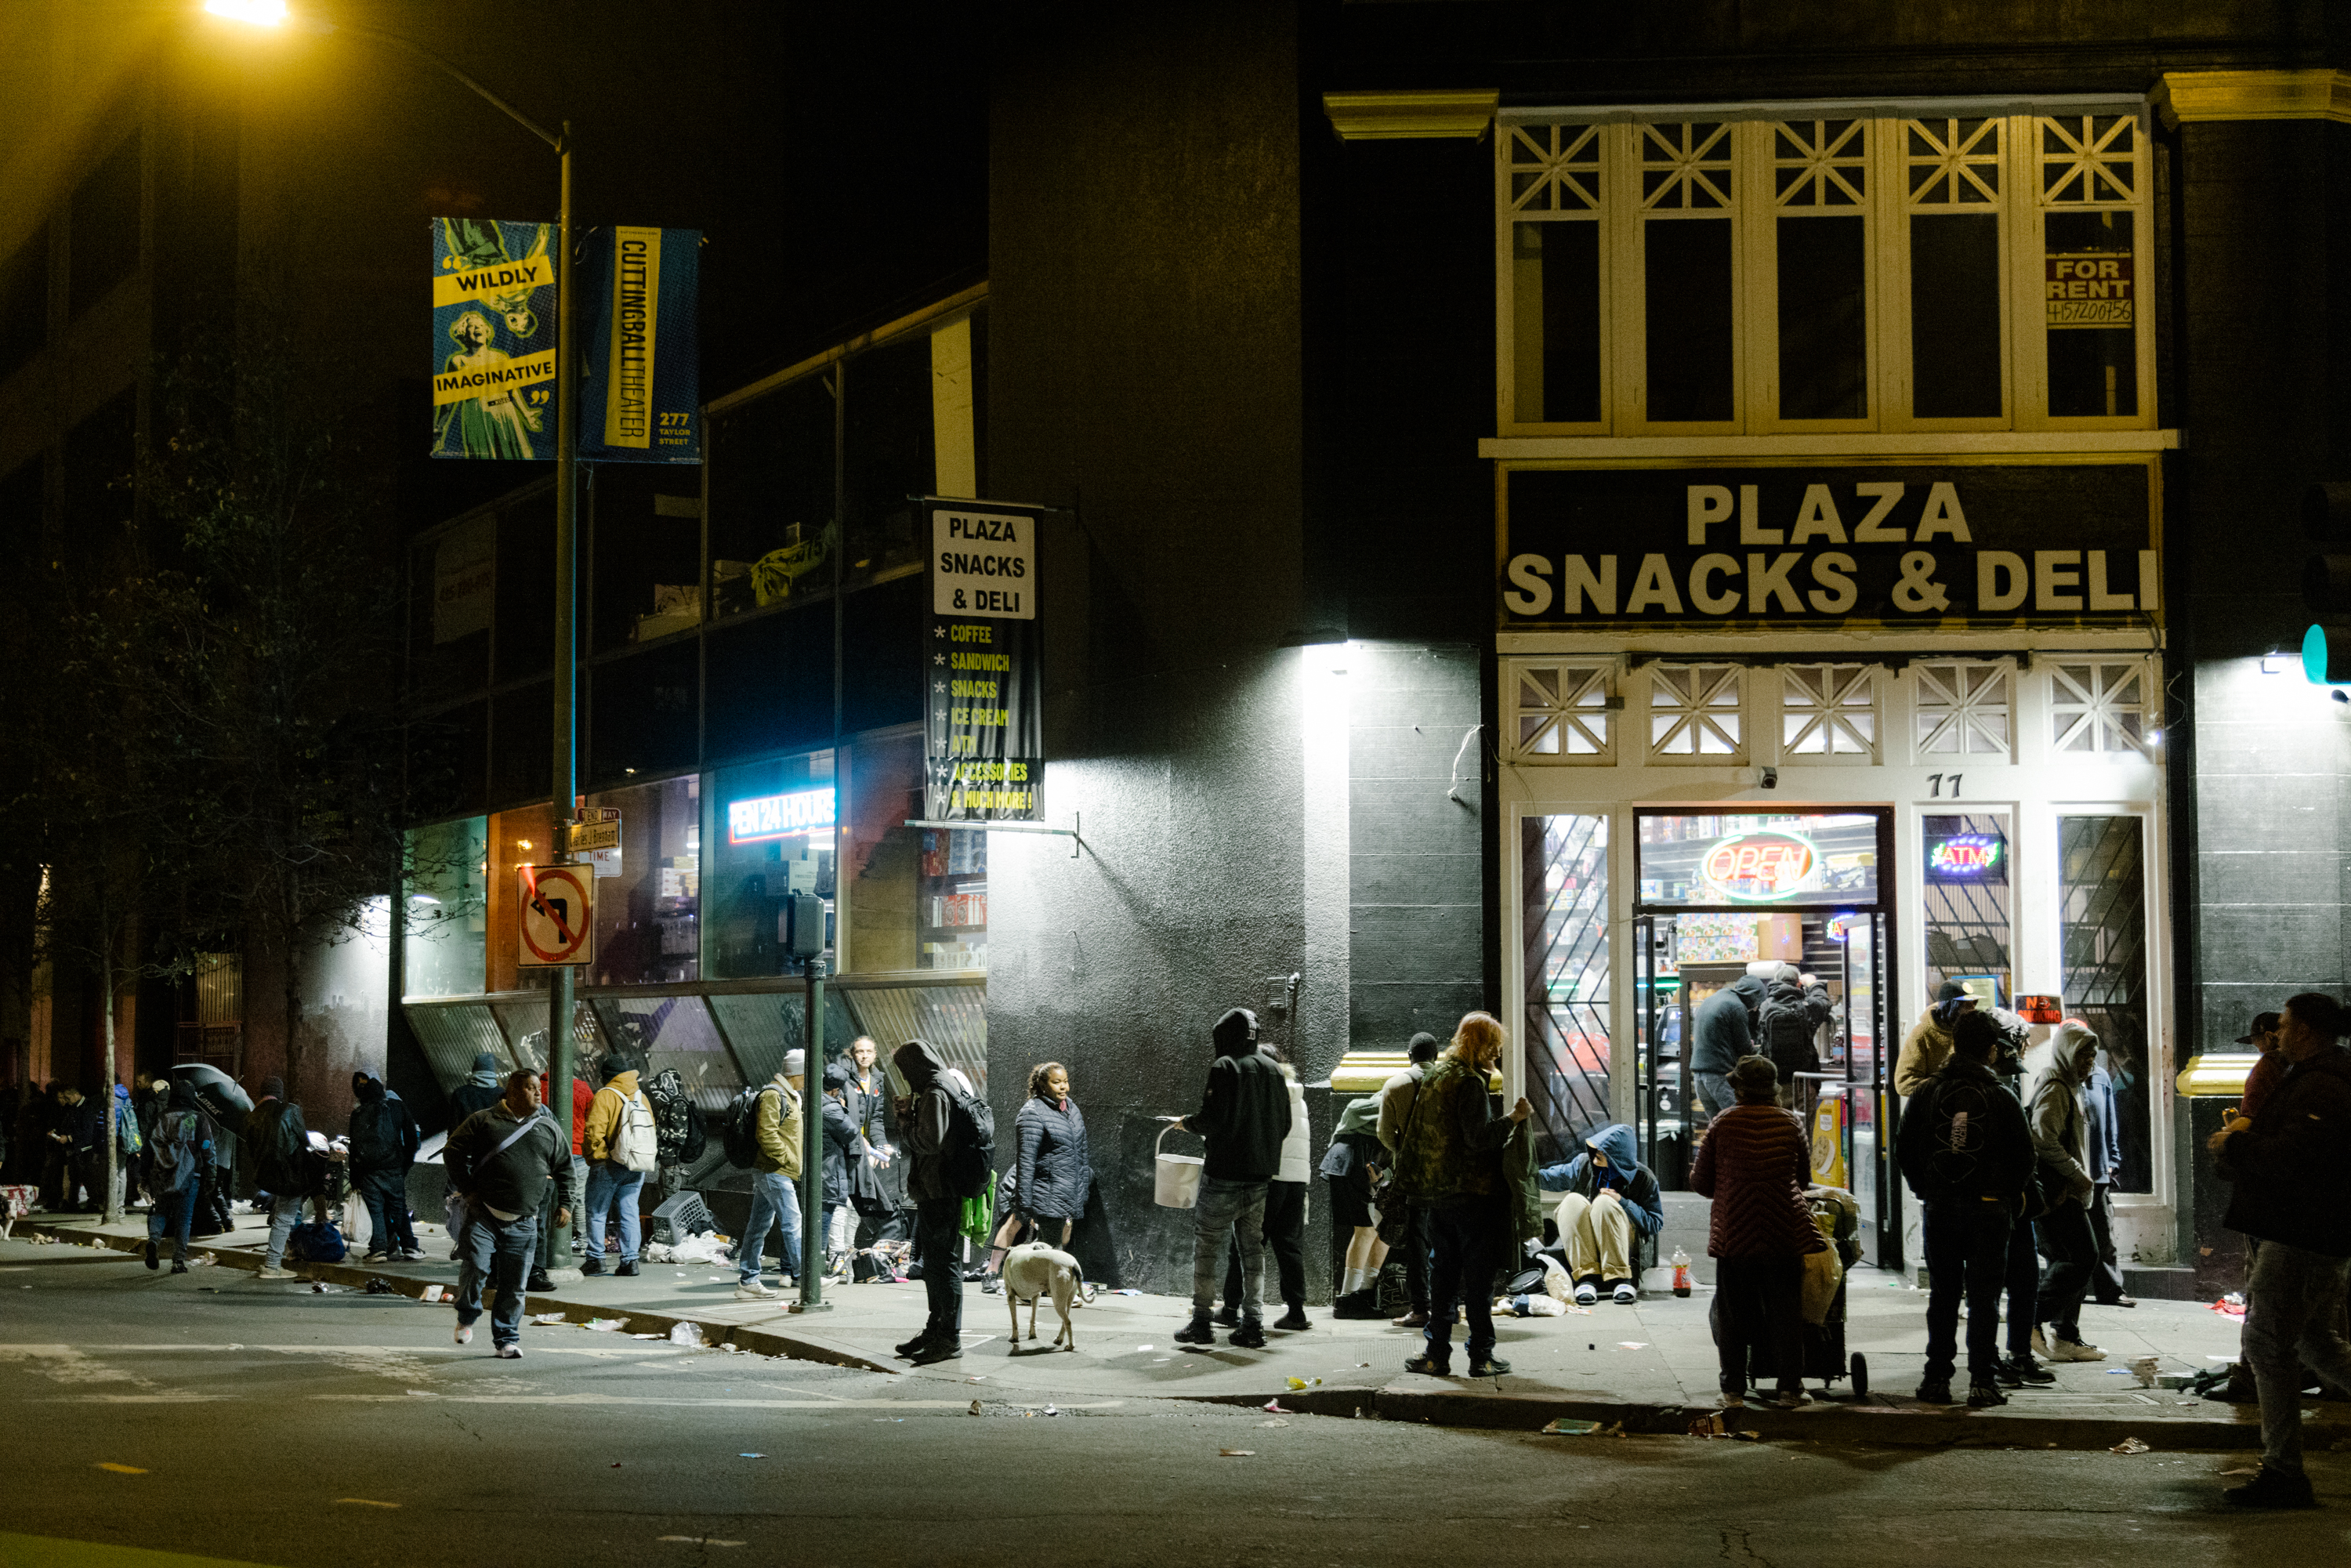 A nighttime scene with people gathering outside "Plaza Snacks & Deli," some with dogs, amid a lit "OPEN" sign.